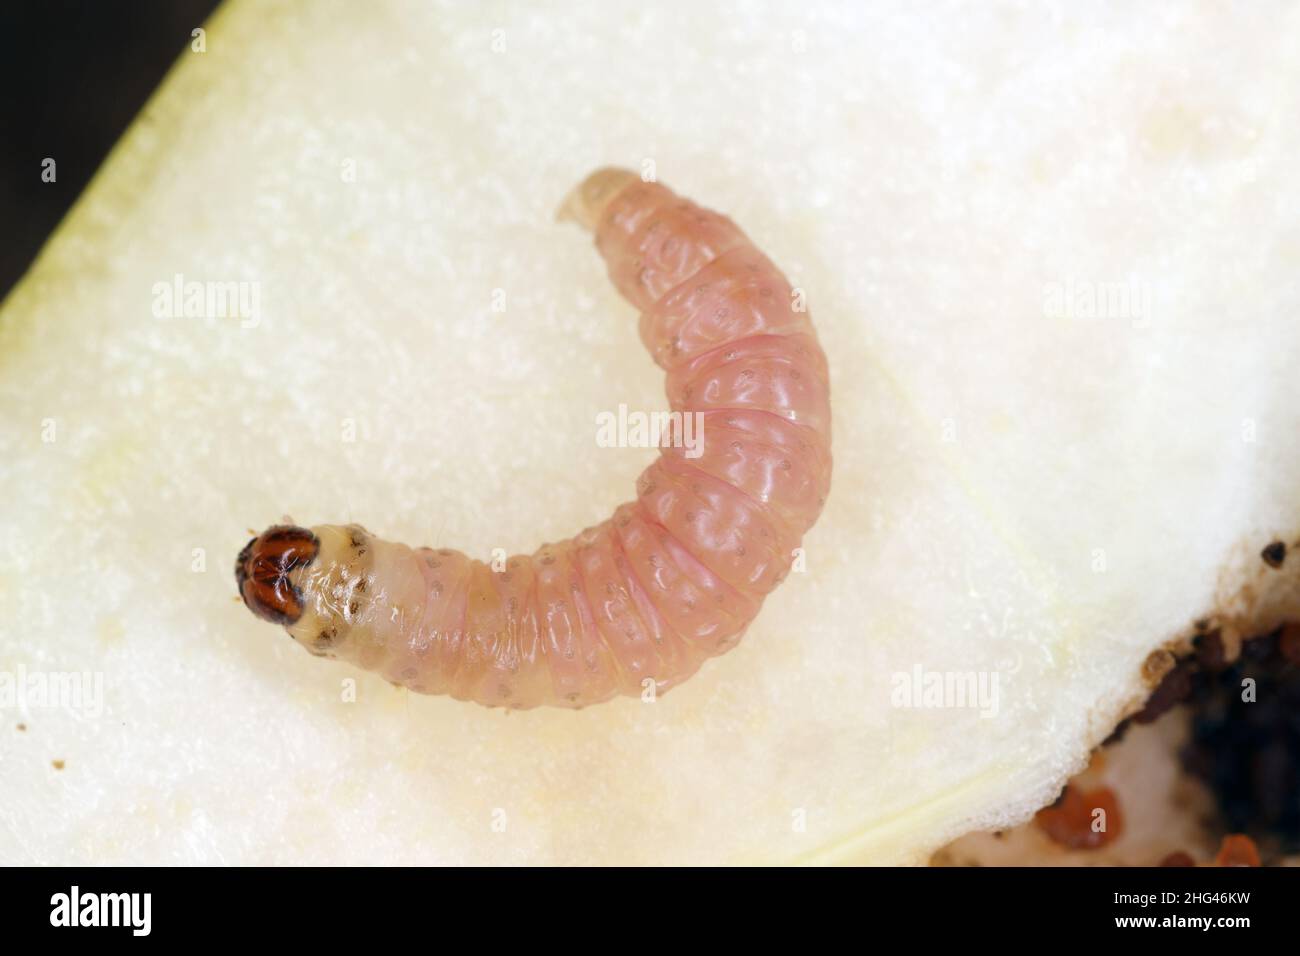 Caterpillar of the codling moth - Cydia pomonella in an apple. Major pests to agricultural crops, mainly fruits such as apples and pears in orchards. Stock Photo